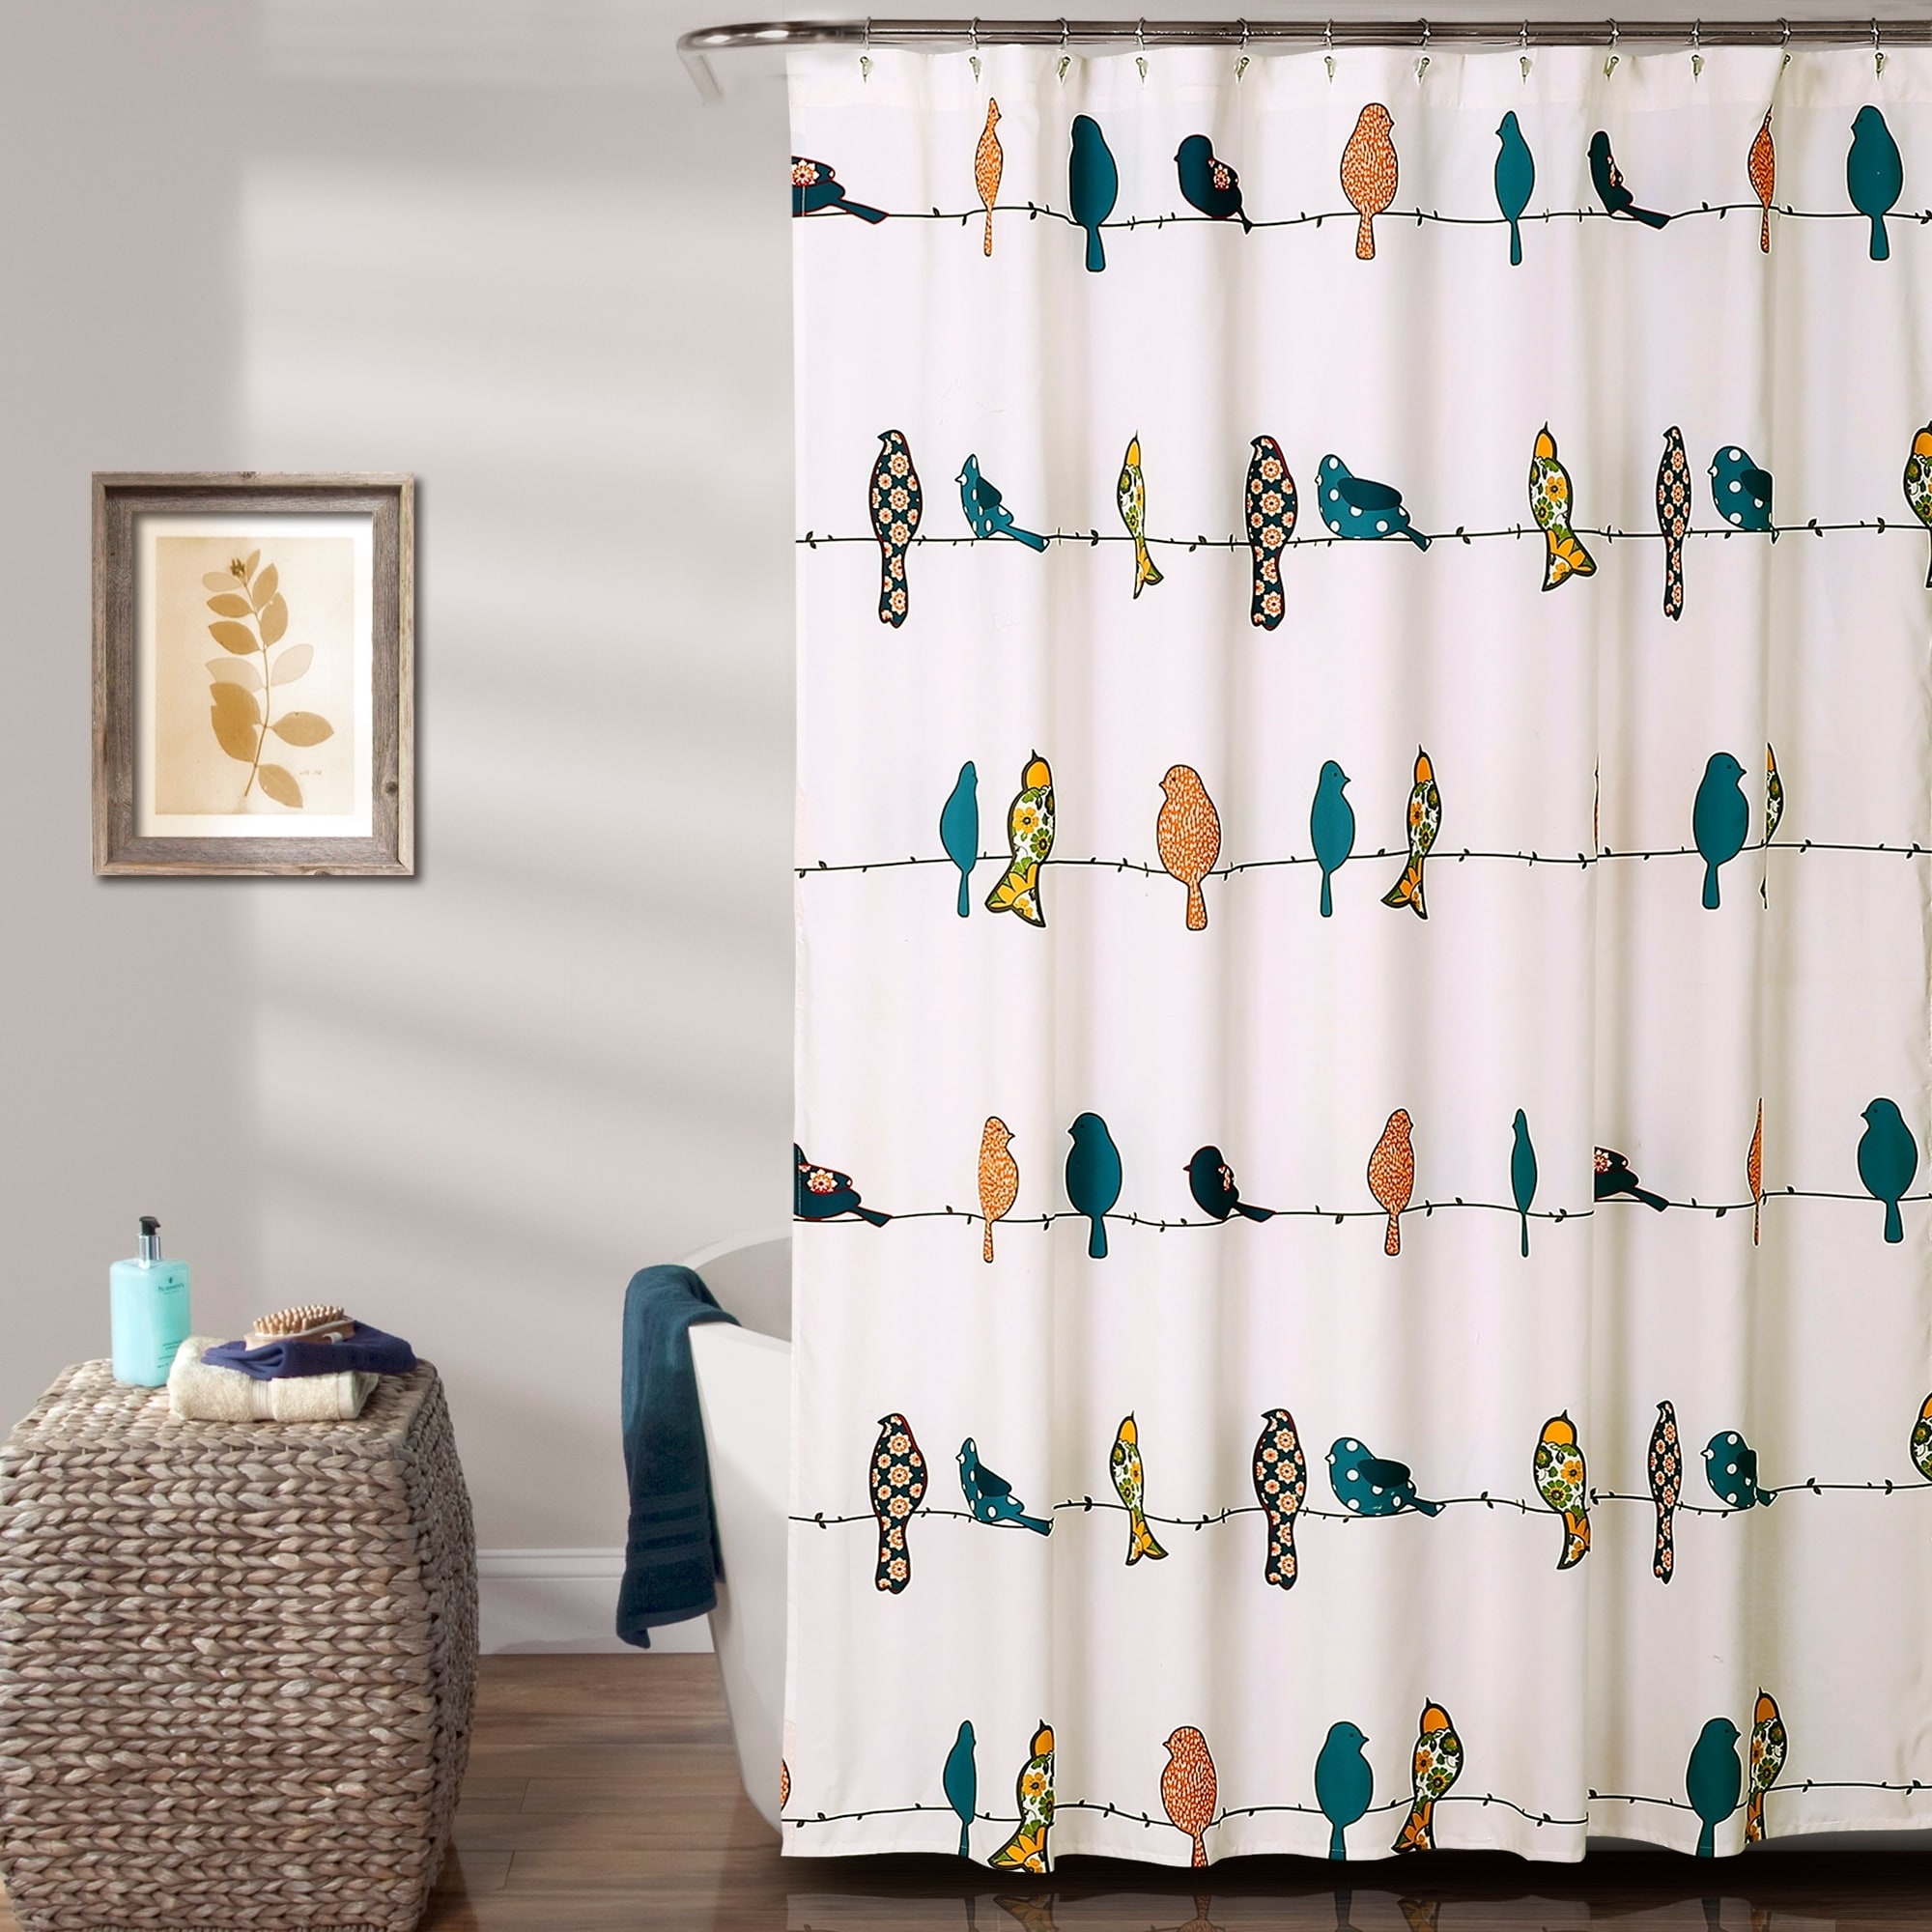 Green Frog King Fabric Shower Curtain Sets Bathroom Decor with Hooks 72 x  72